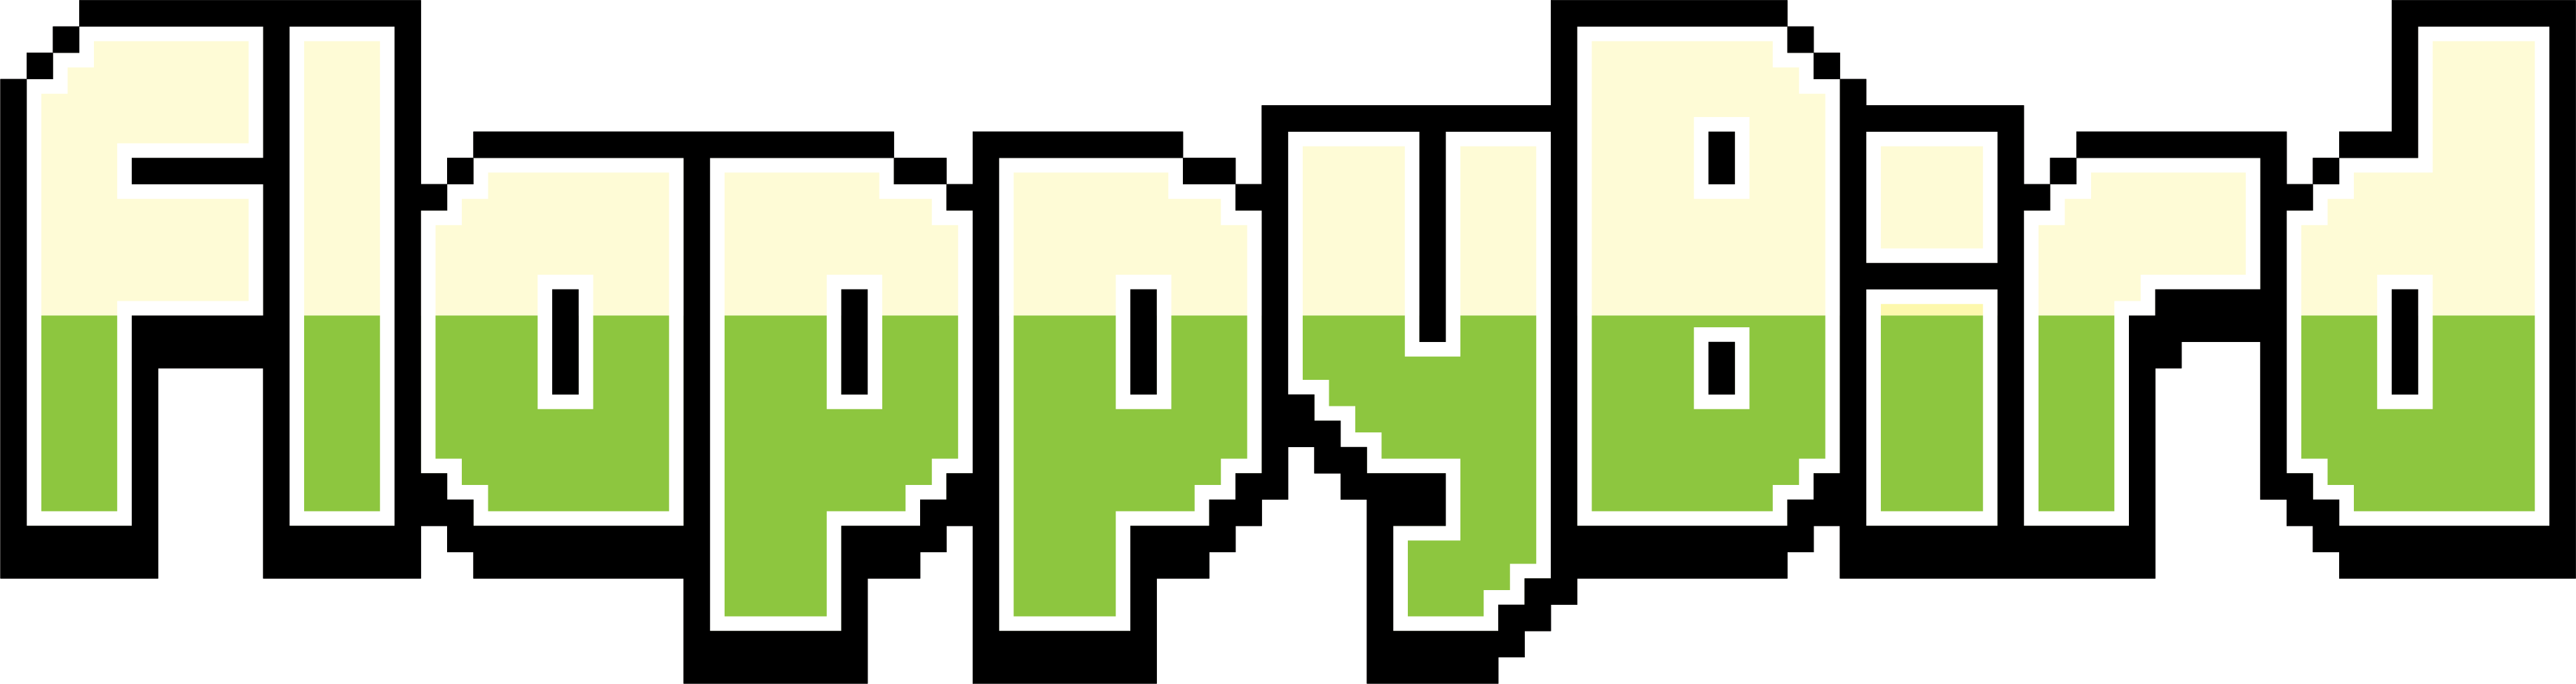 Flappy Logo - Flappy Bird – Play The Official Game On PC & Mobile